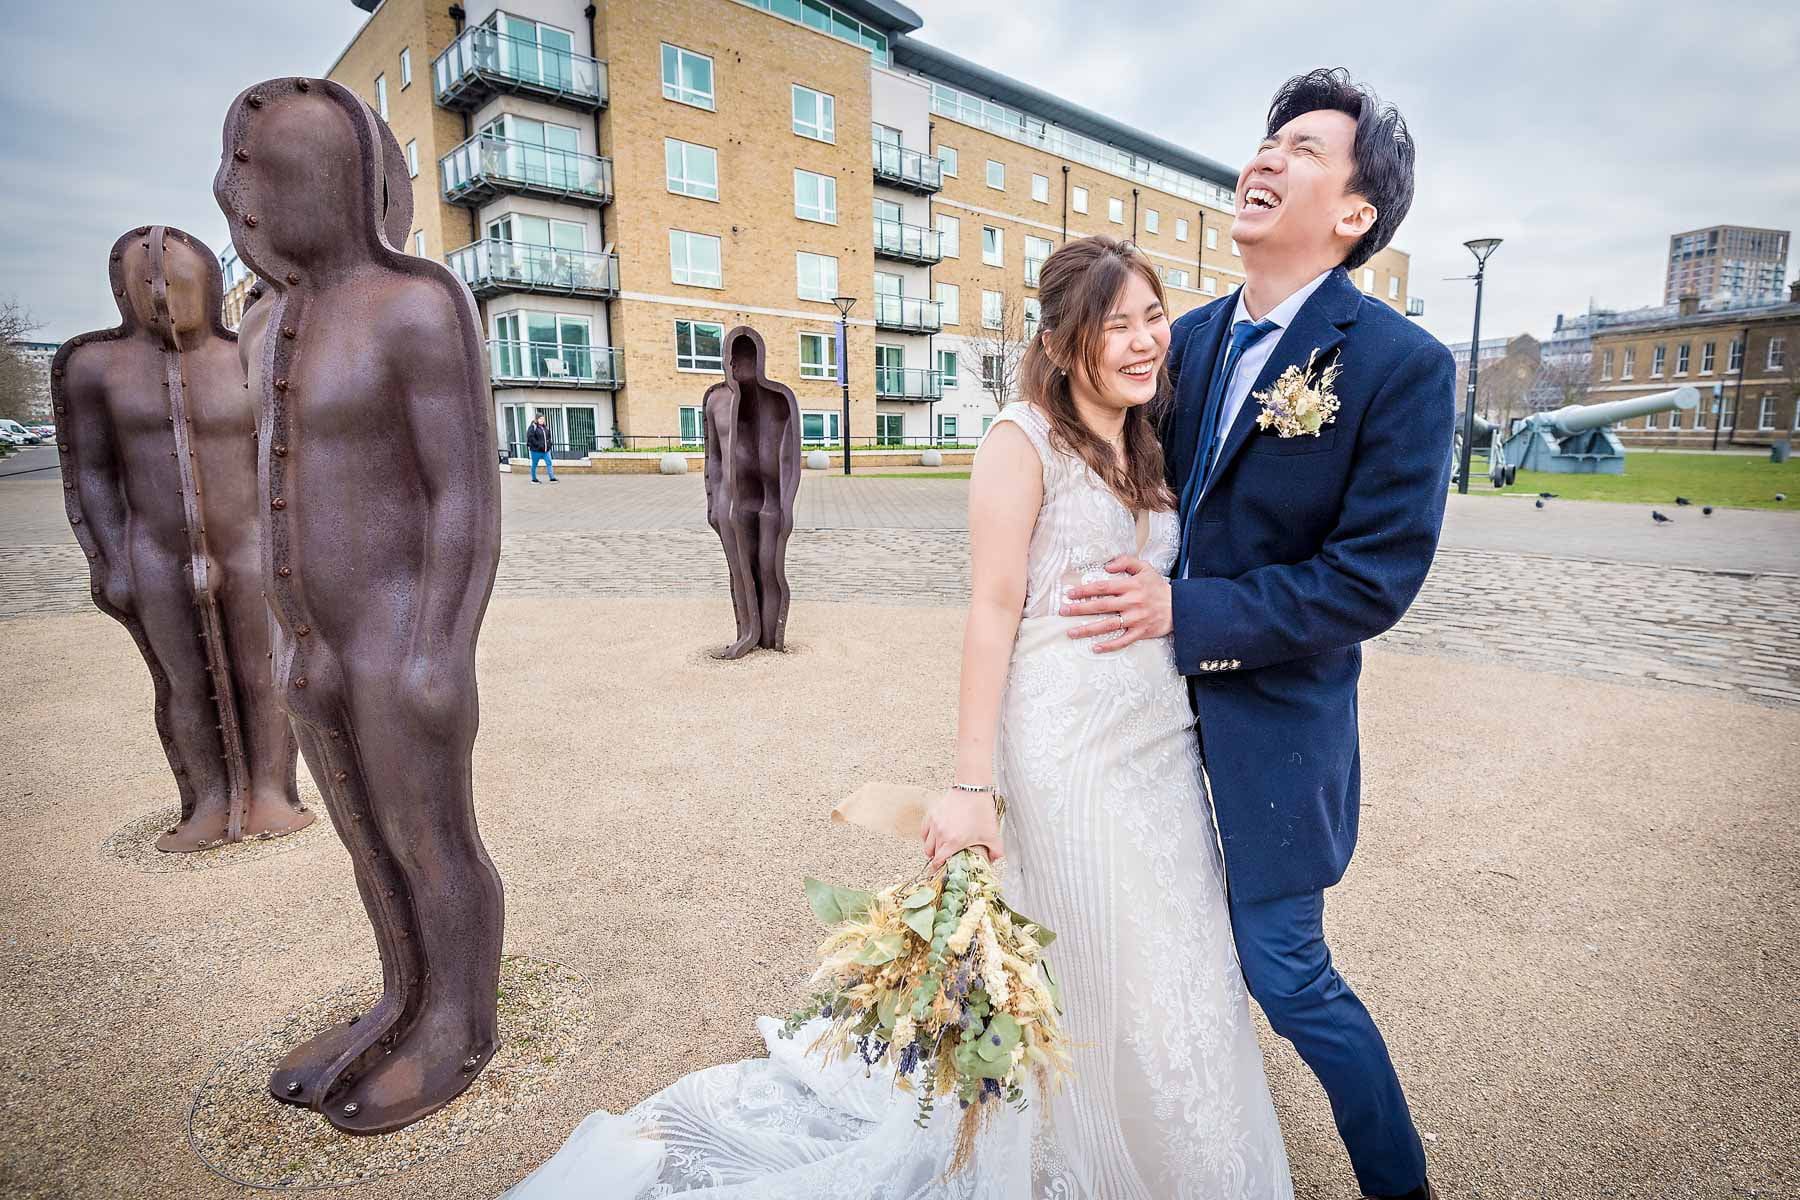 The wedding couple laughing as they pose with sratues at the Royal Arsenal Heritage Site in Woolwich, London